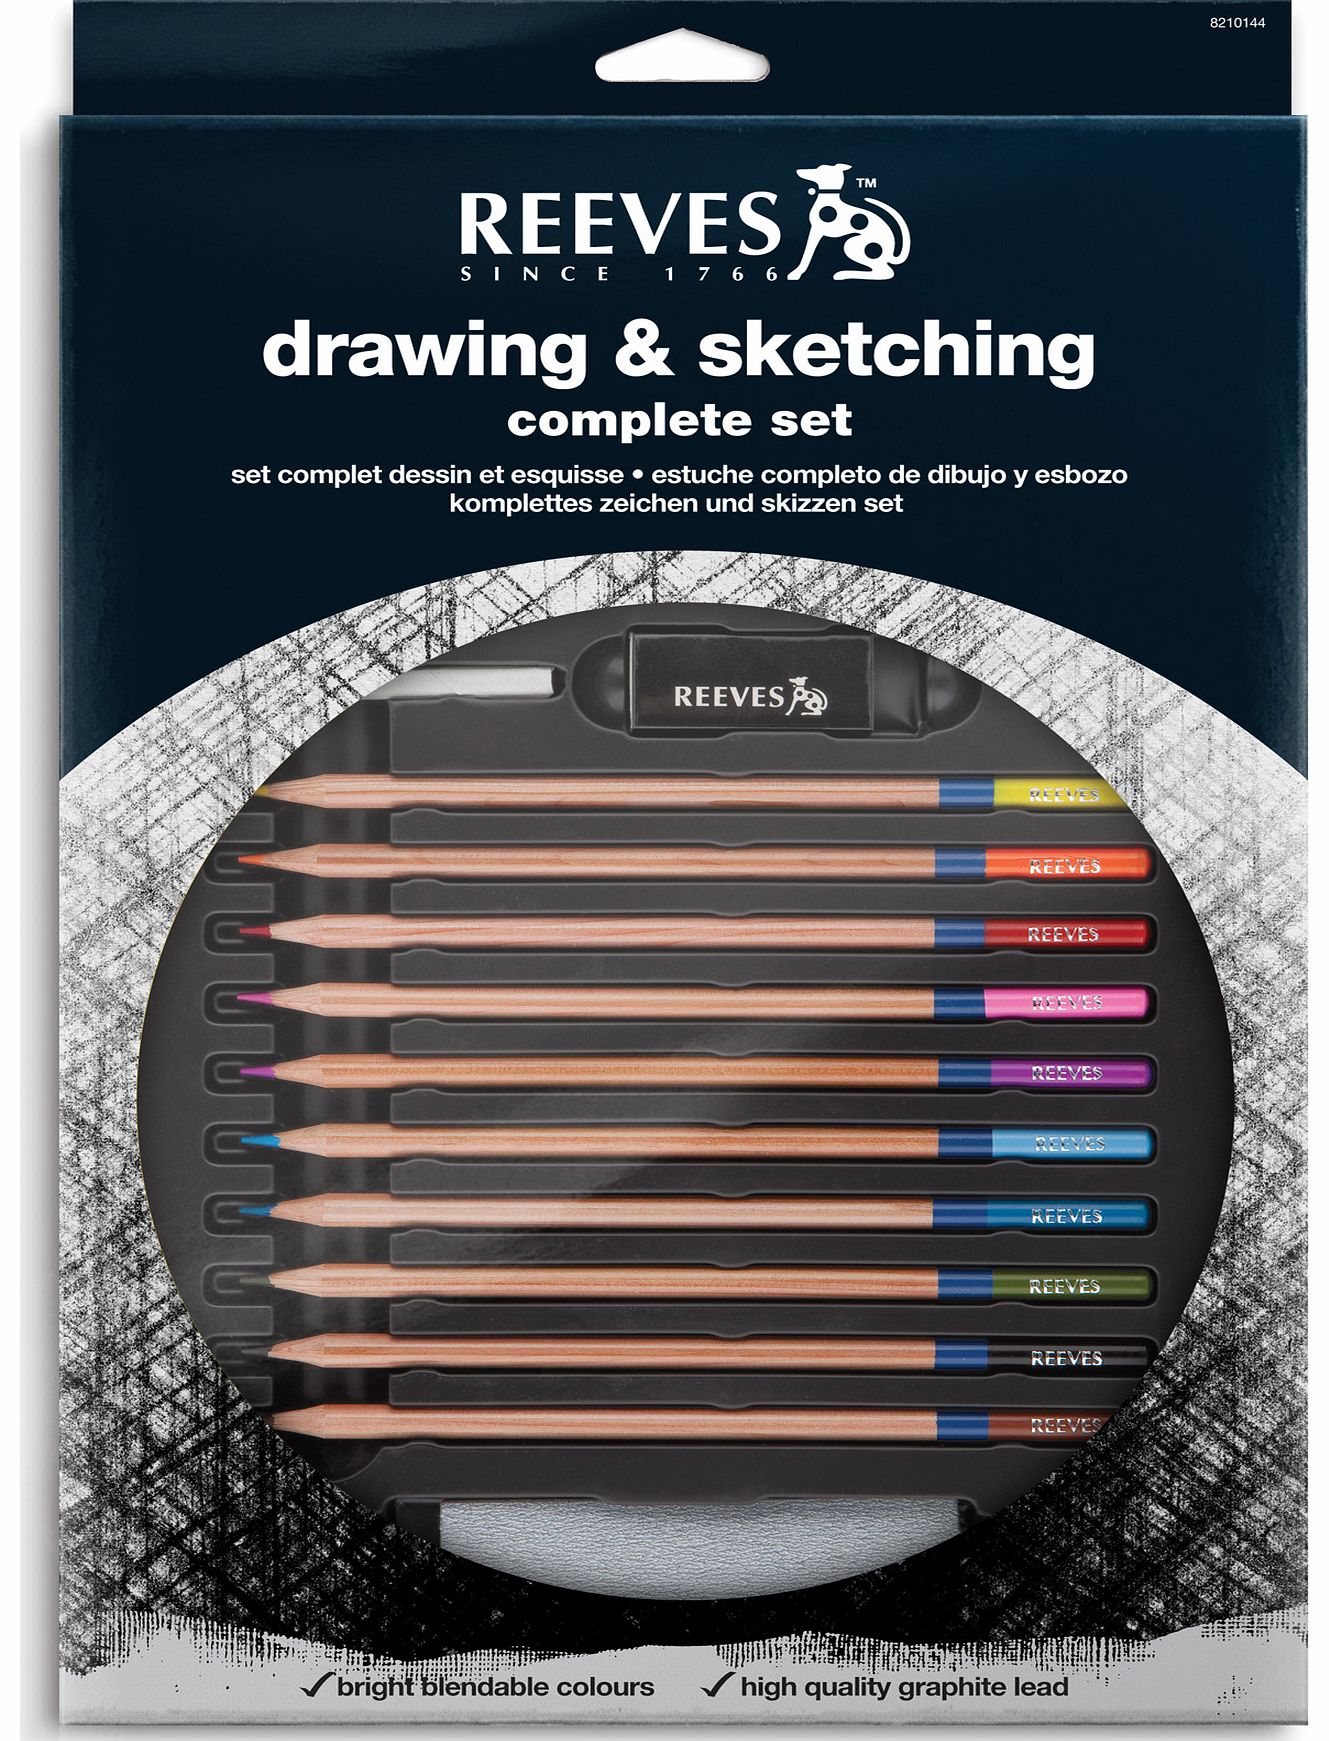 Reeves Compete Drawing Set